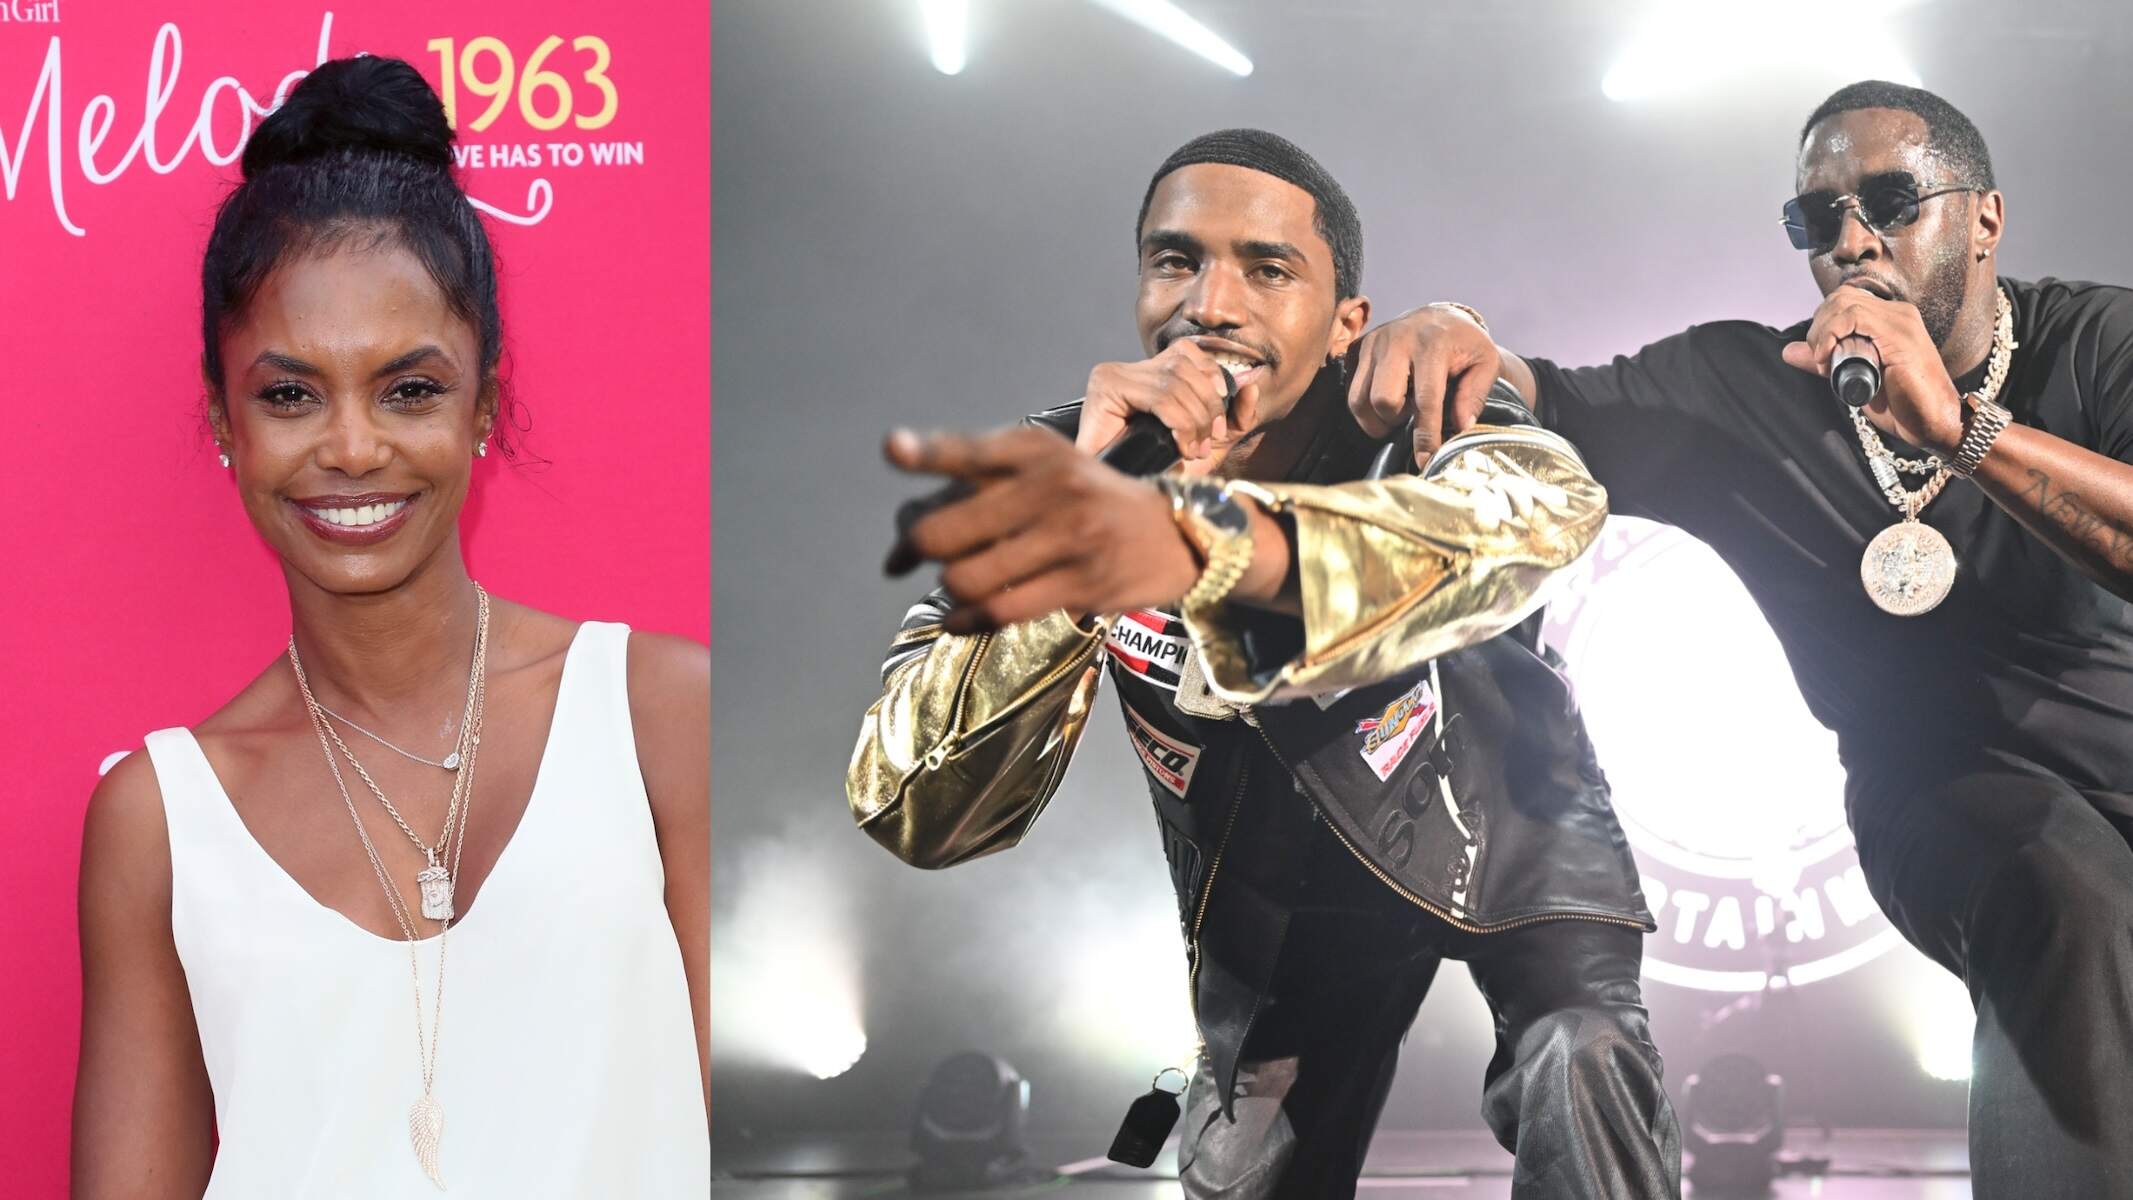 A photo of Kim Porter in a white top alongside a photo of King Combs and Diddy rapping on a stage